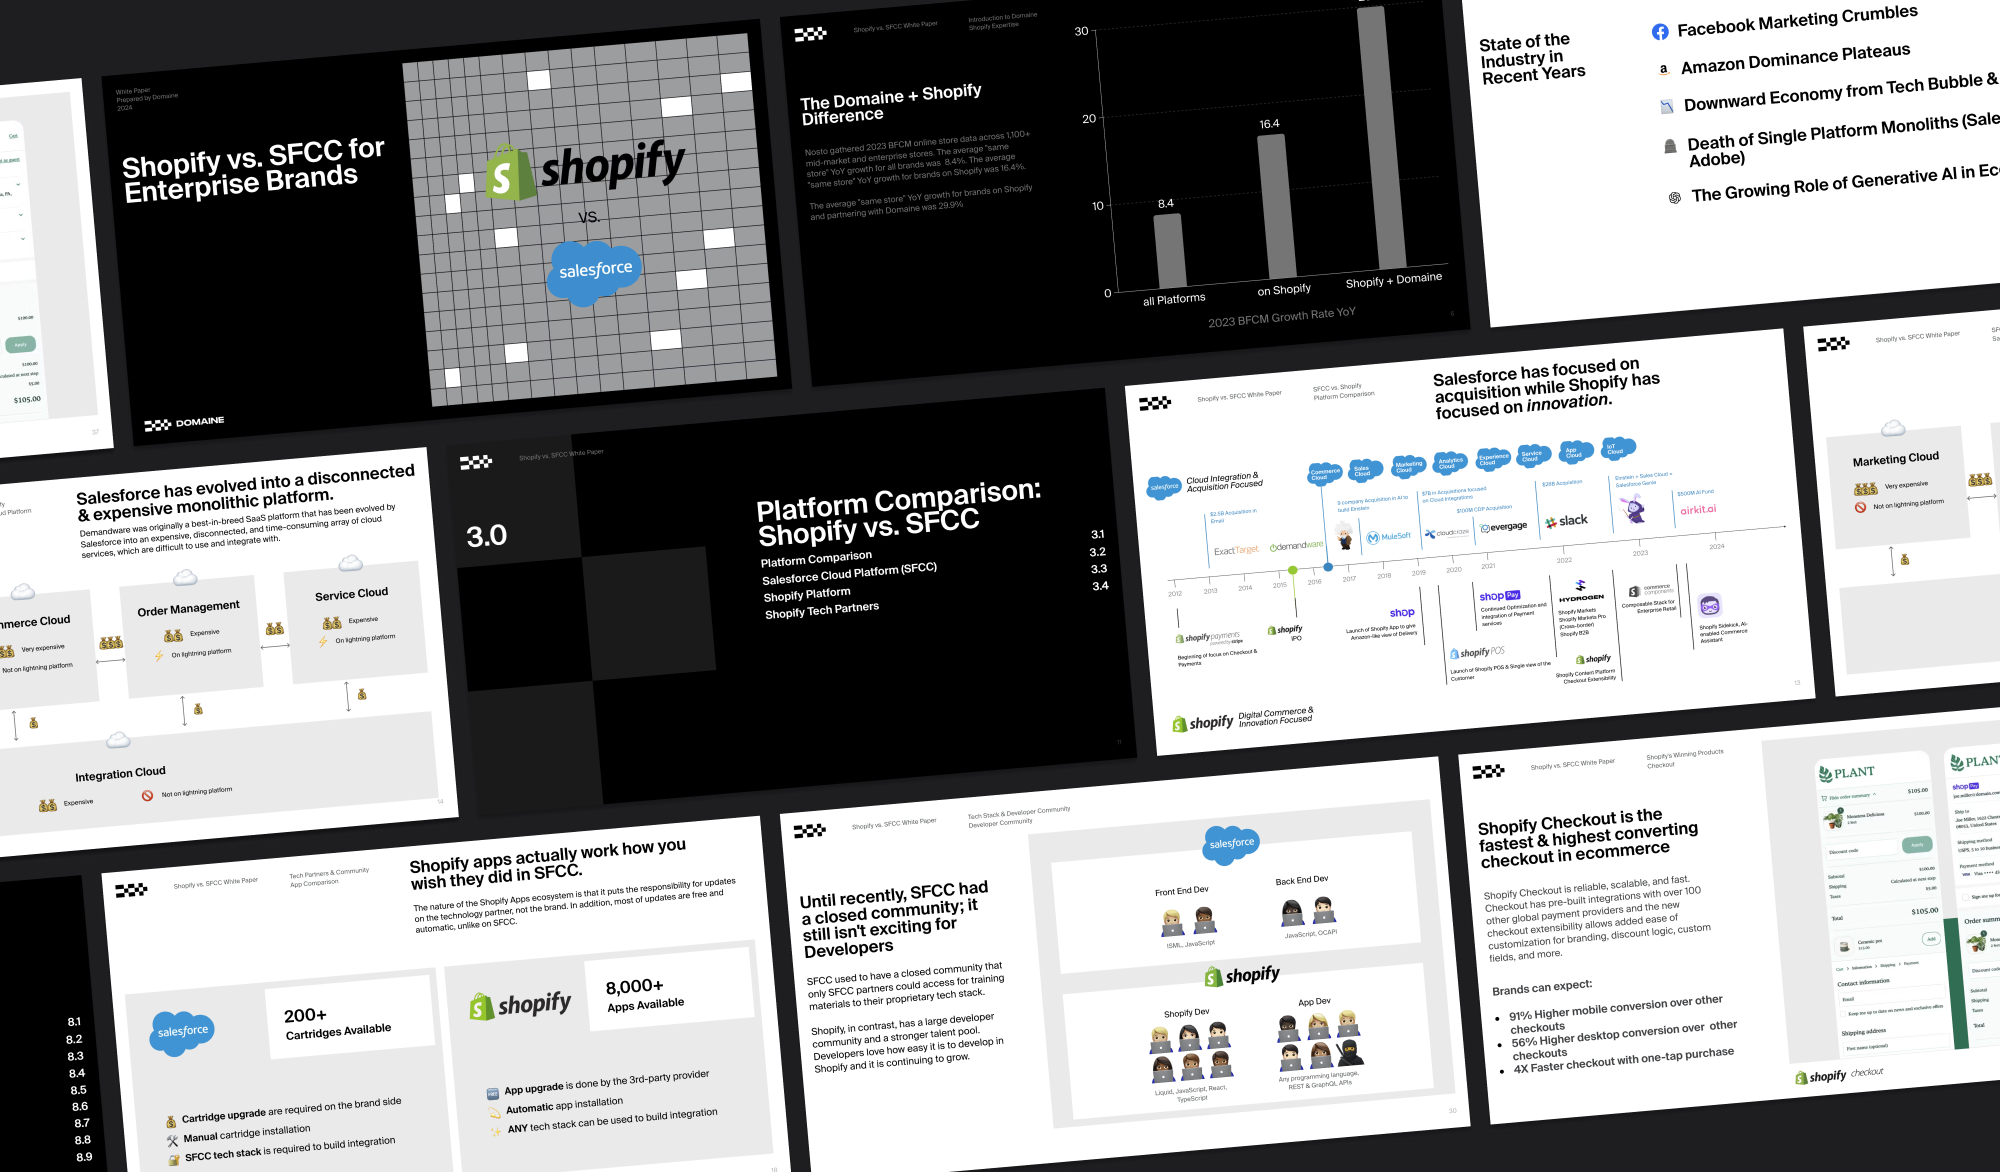 Image of various slides from the Shopify vs. SFCC white paper, on a black background.